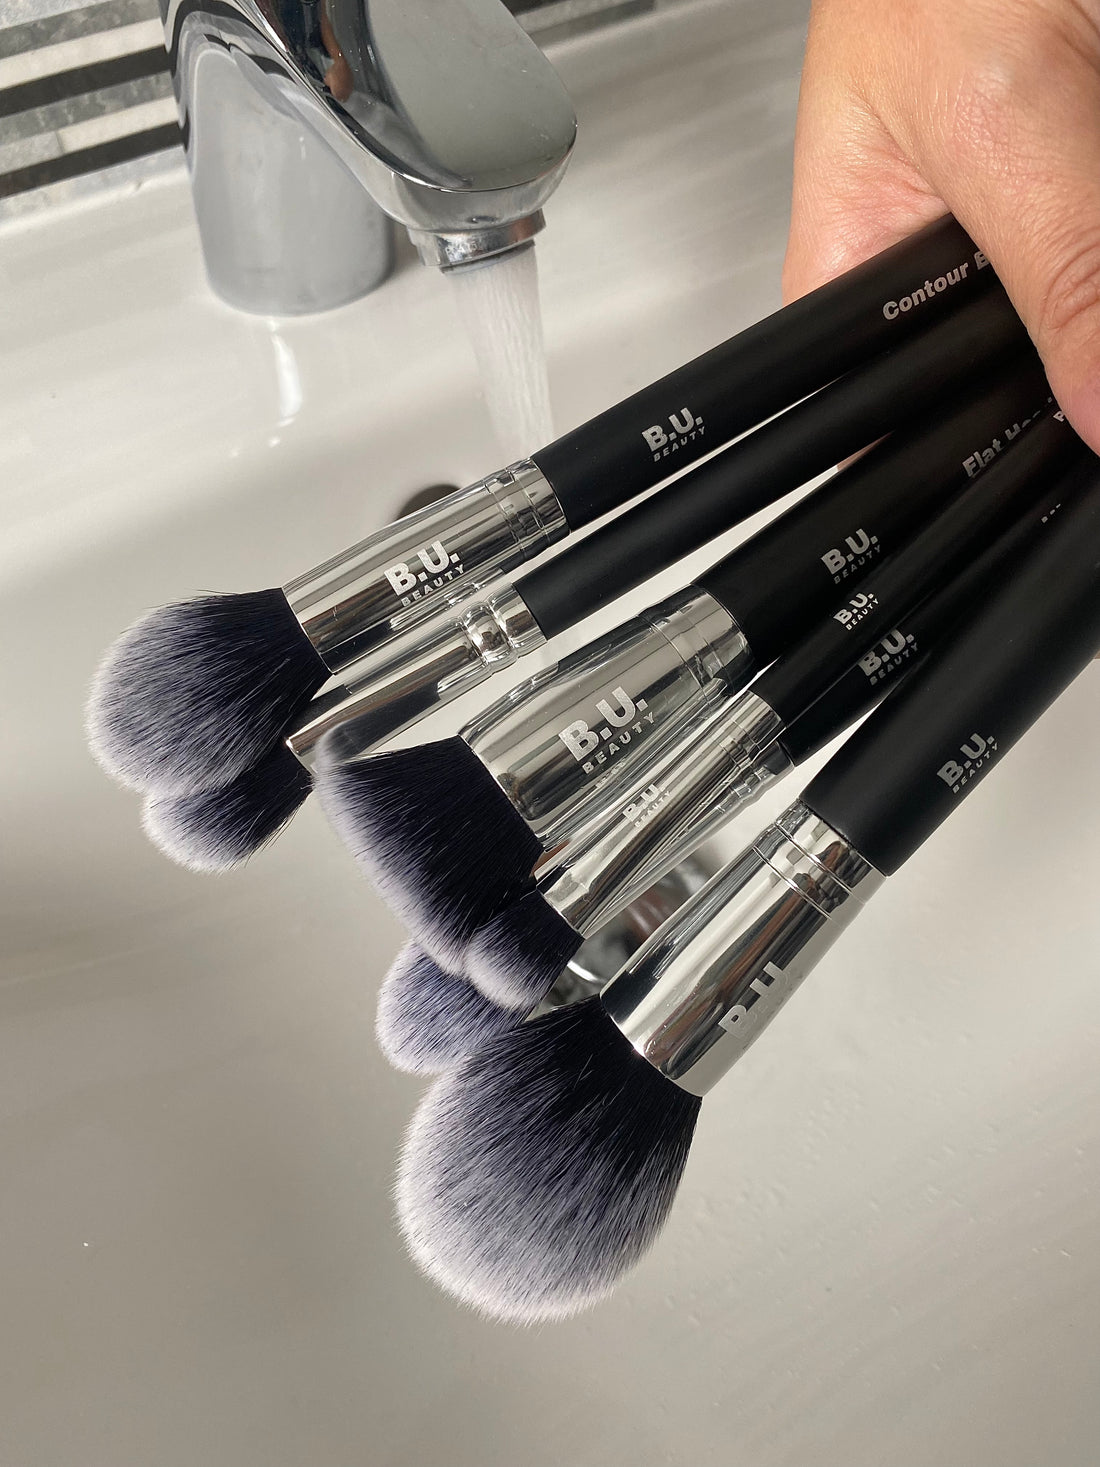 cleaning your makeup brushes